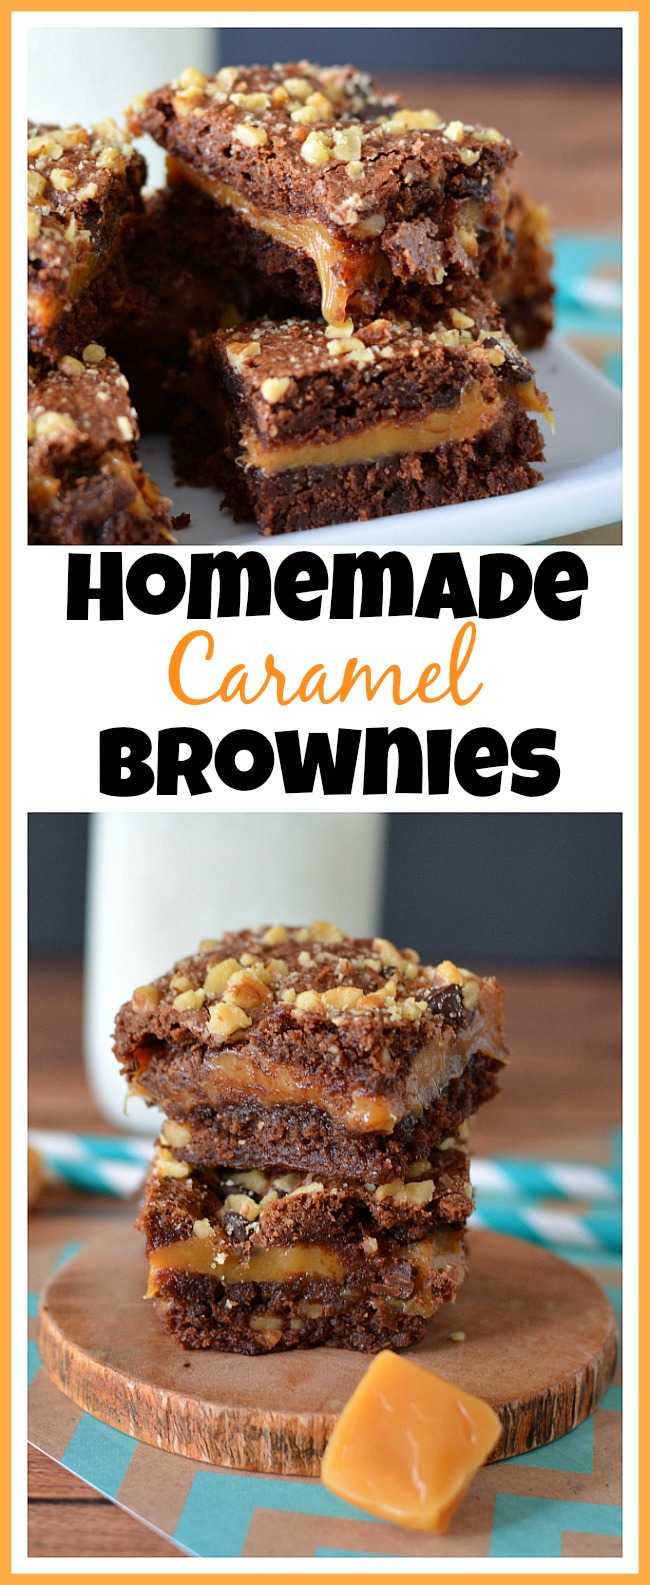 If you love chocolate and caramel, then you'll love them together in these caramel brownies! The caramel is so gooey and delicious warm from the oven!